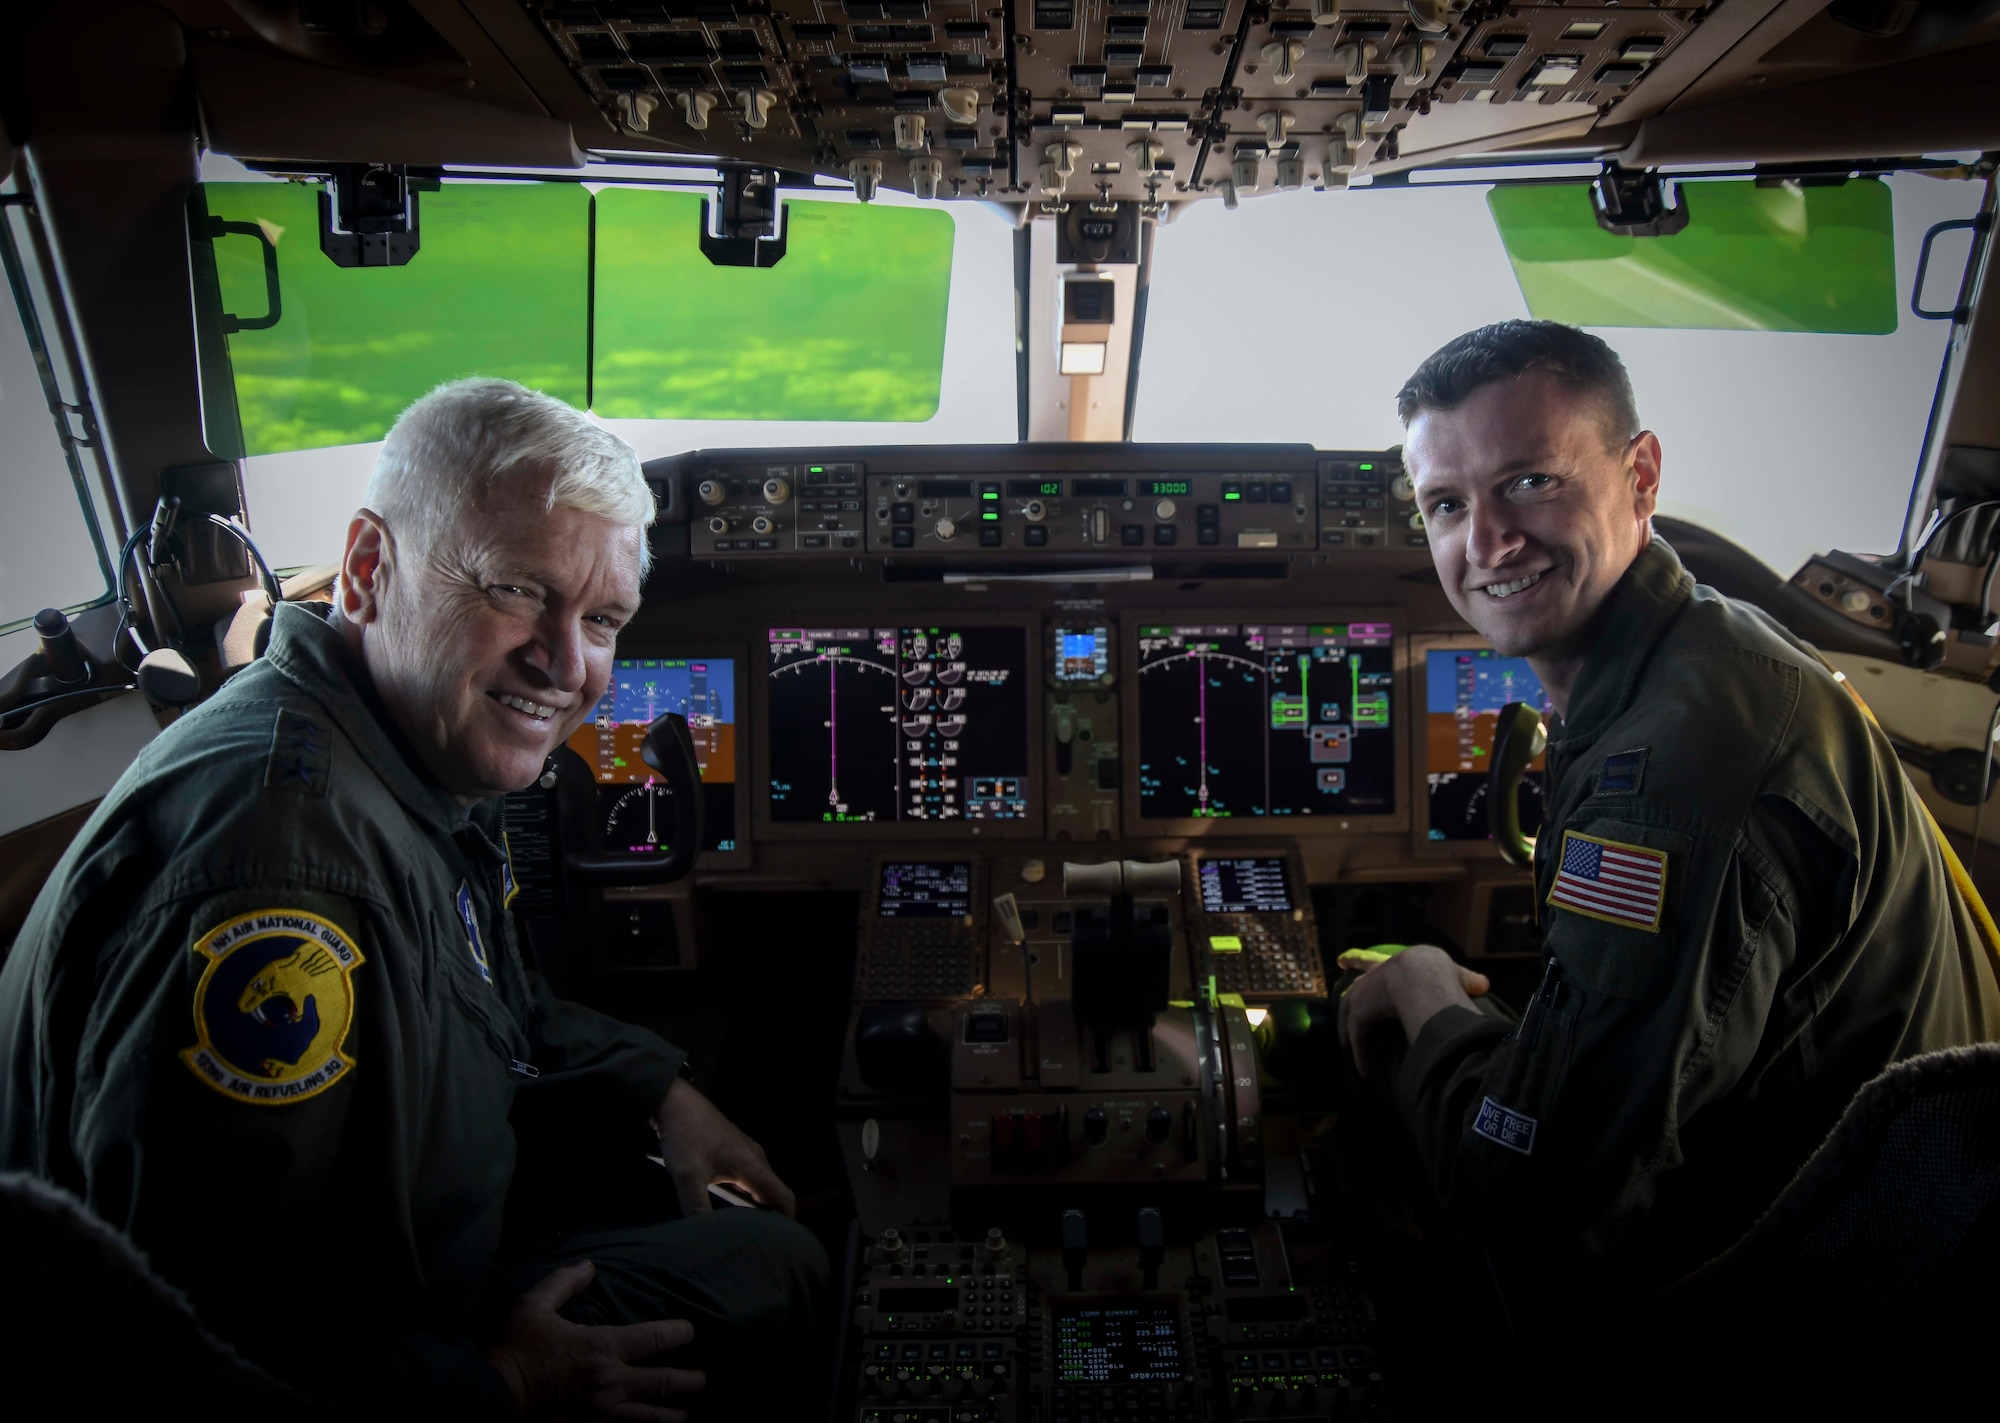 U.S. Air Force Lt. Gen. L. Scott Rice, left, director of the Air National Guard, and U.S. Air Force Capt. Lee
Rice, right, a pilot assigned to the 157th Air Refueling Wing, Pease Air National Guard Base, New
Hampshire, fly a KC-46A Pegasus Aug. 8, 2019. This KC-46 flight started at the Boeing Delivery Center in
Seattle, Wash., and ended at the aircraft’s newly assigned home station at the 157th ARW. (U.S. Air
National Guard photo by Staff Sgt. Morgan R. Lipinski)